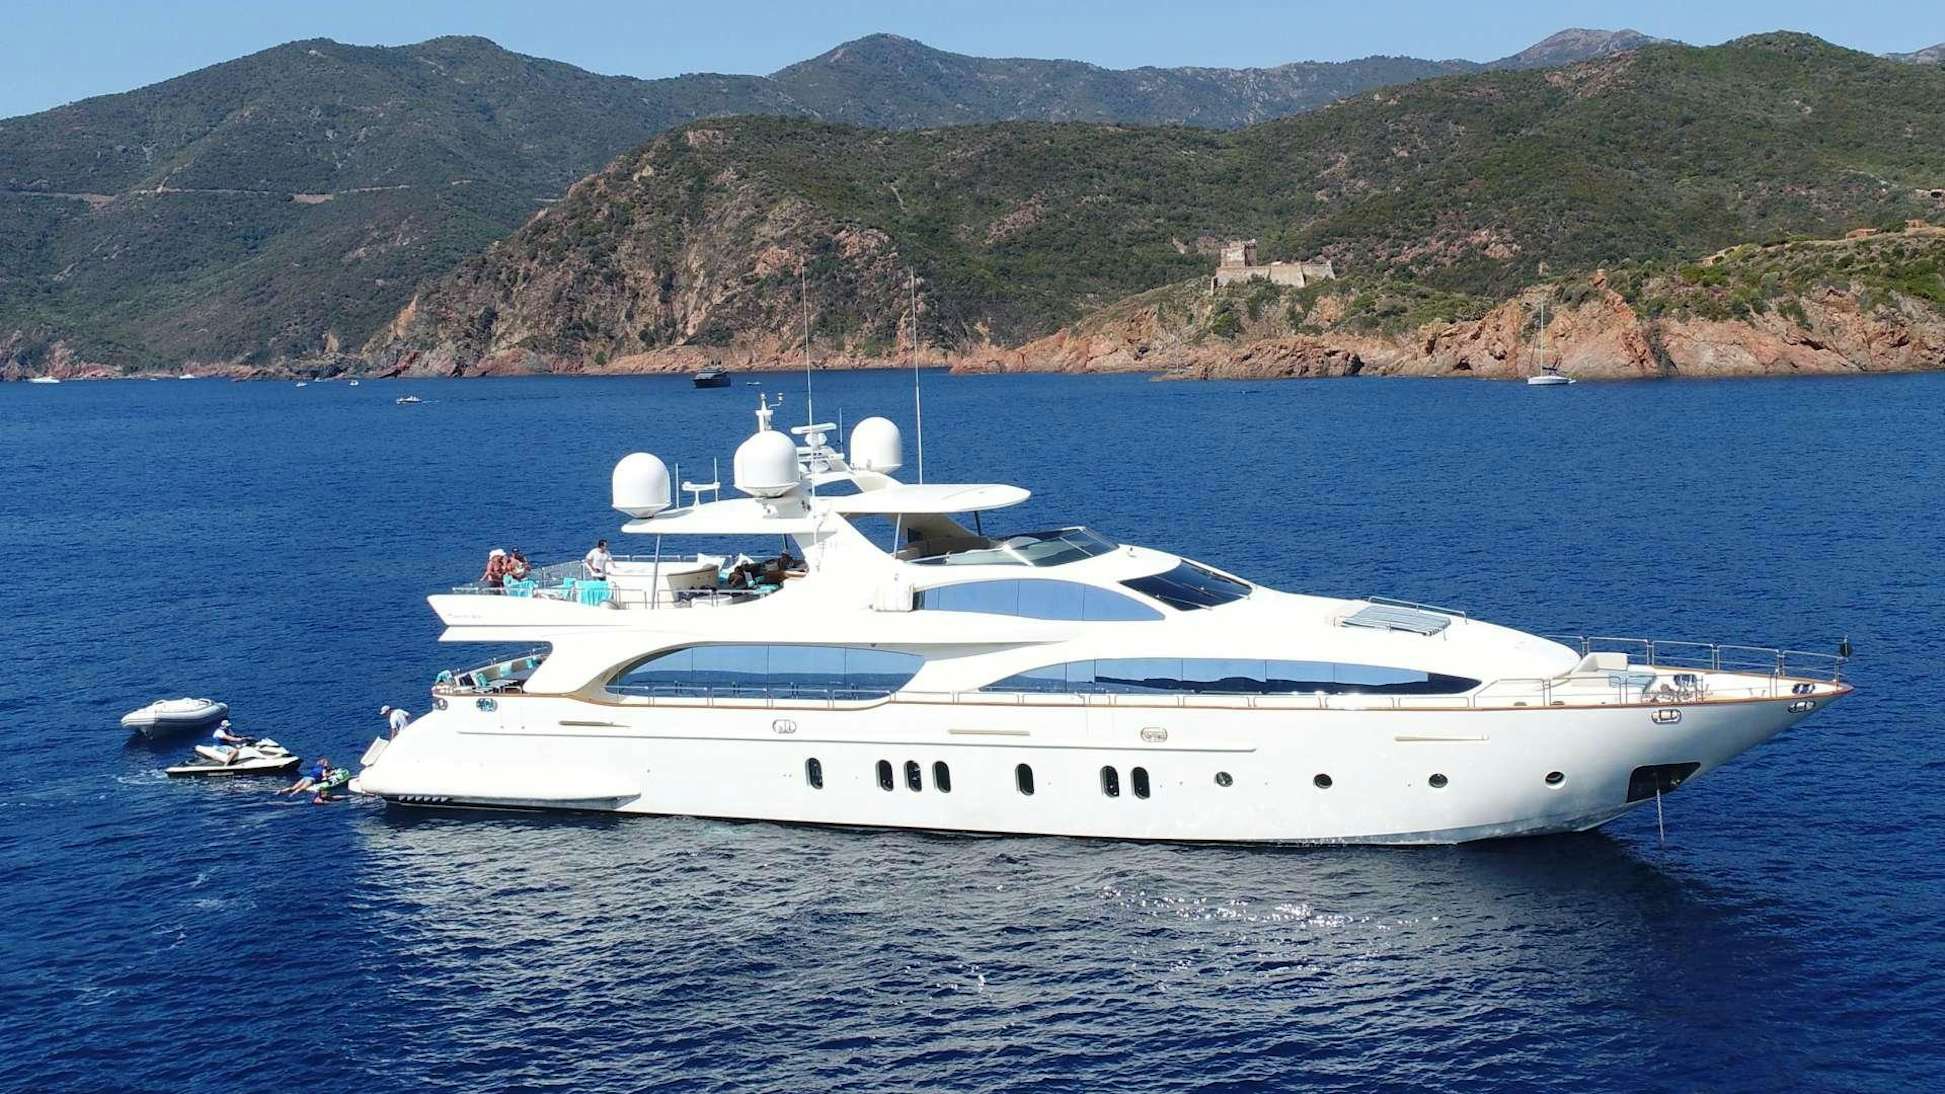 Watch Video for SWEET EMOCEAN Yacht for Charter